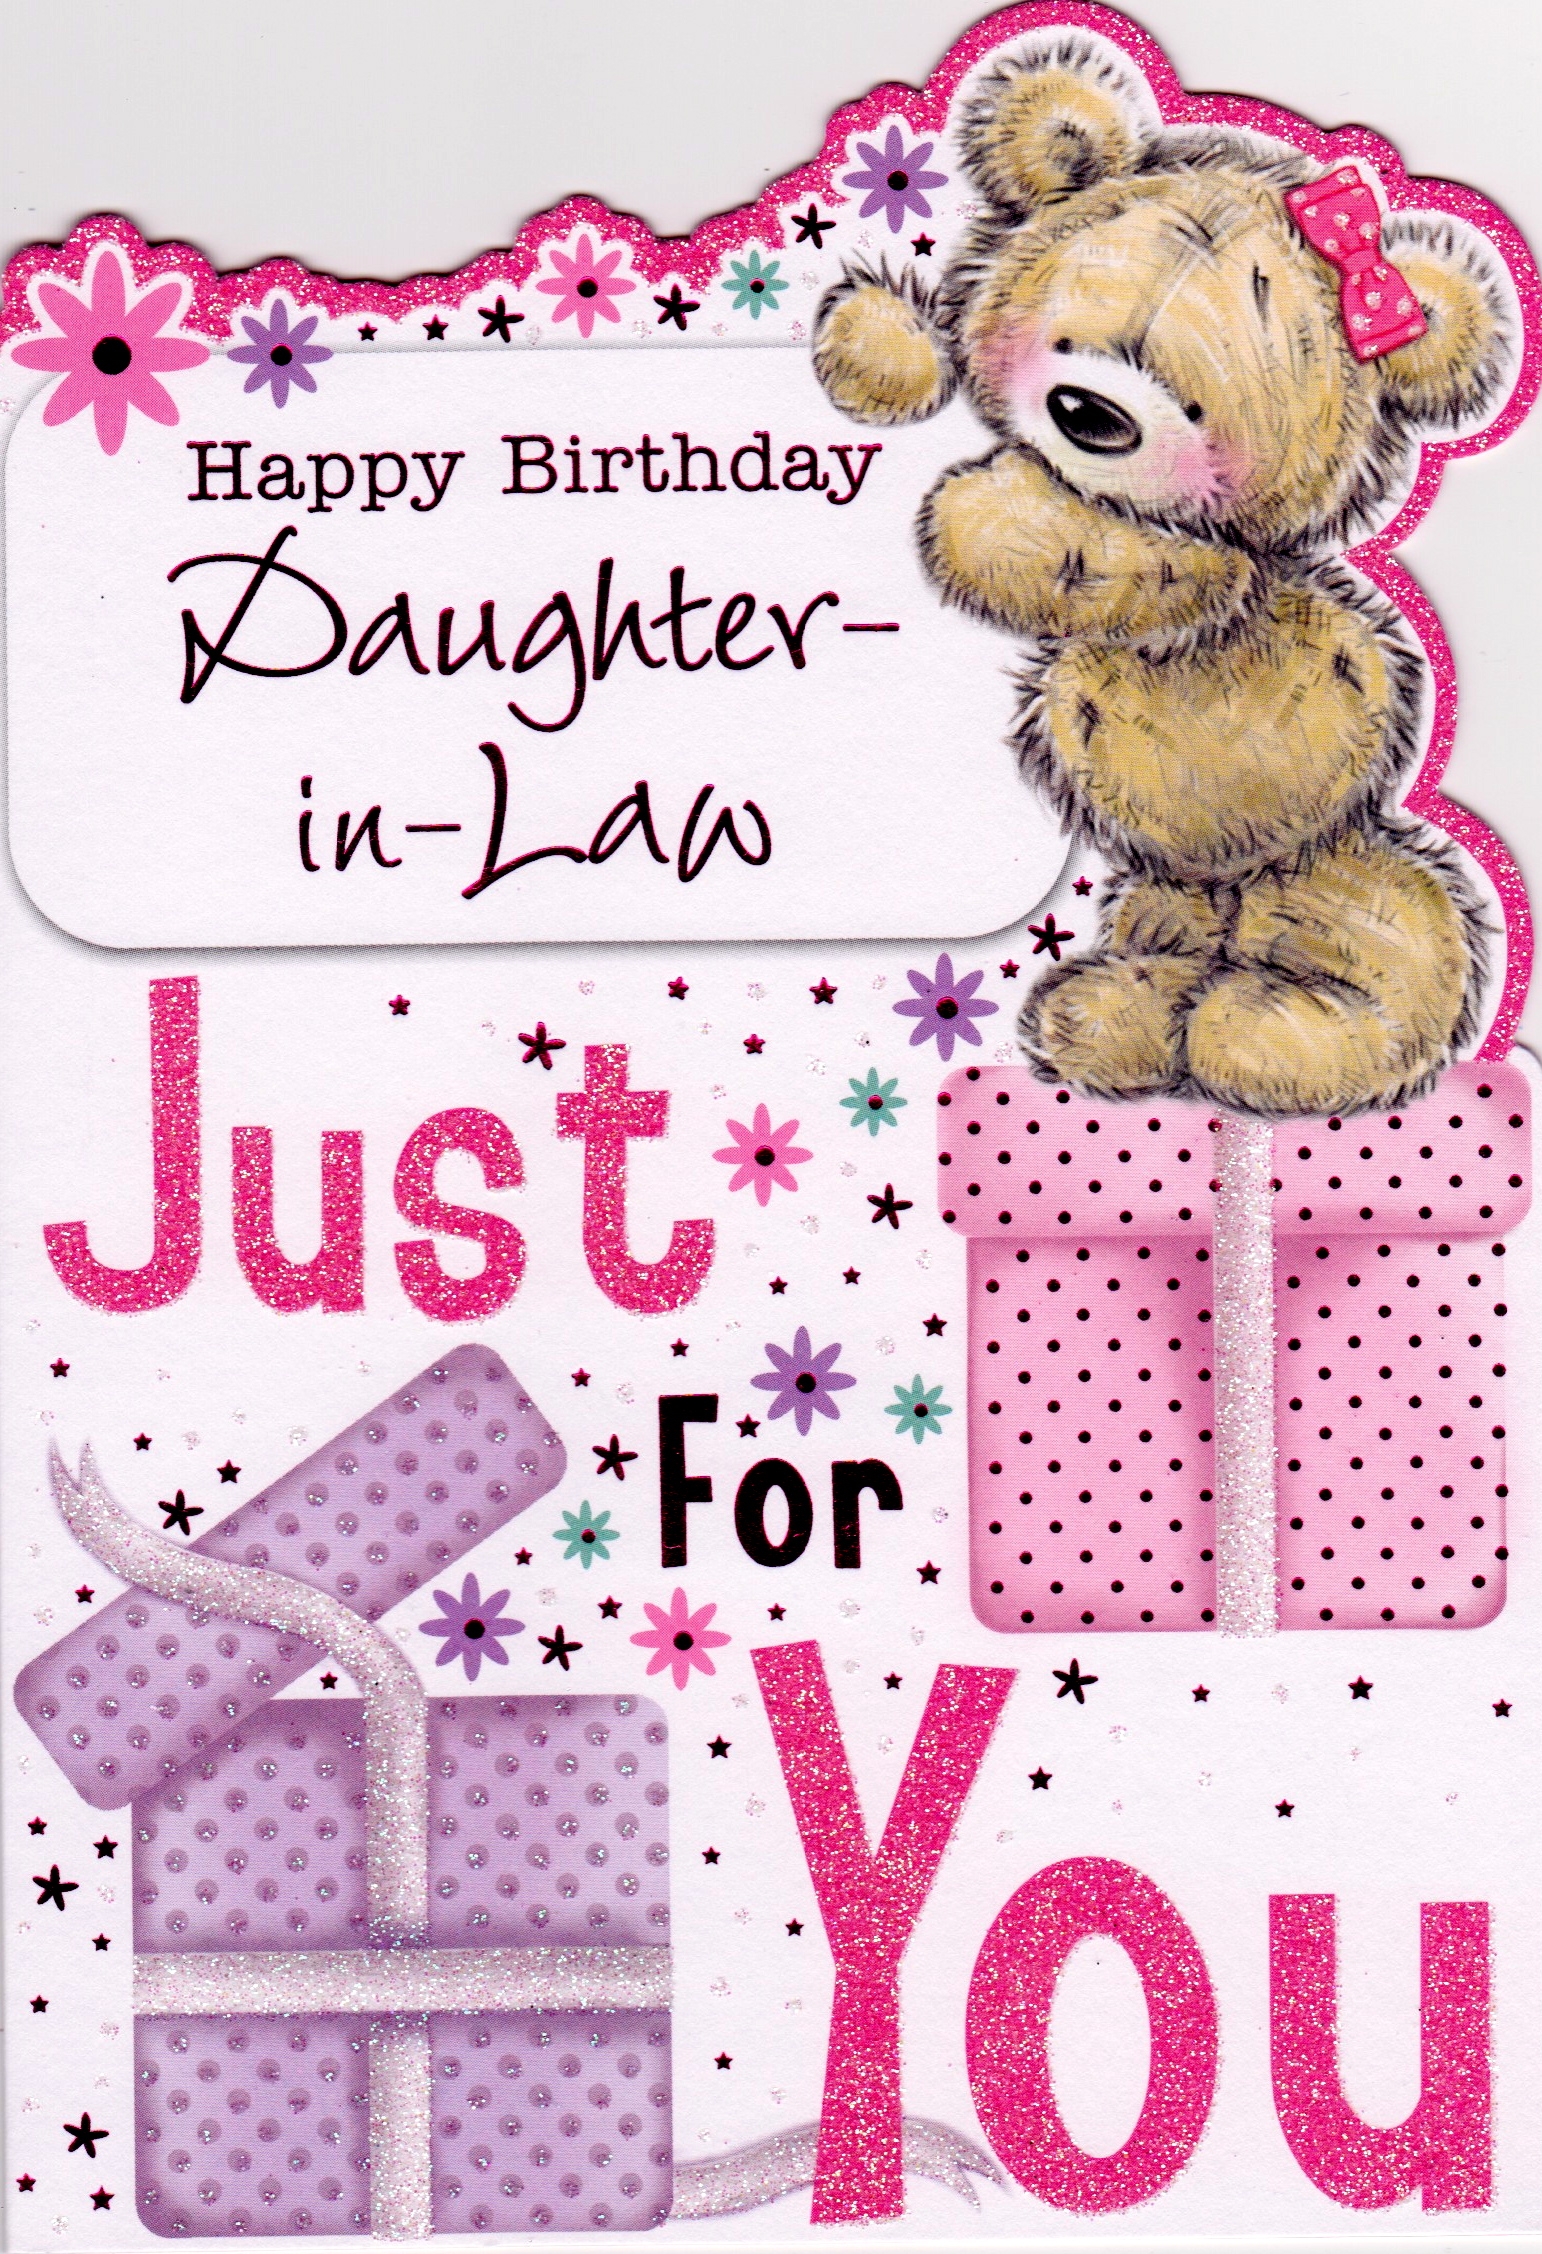 daughter-in-law-birthday-clipart-clip-art-library